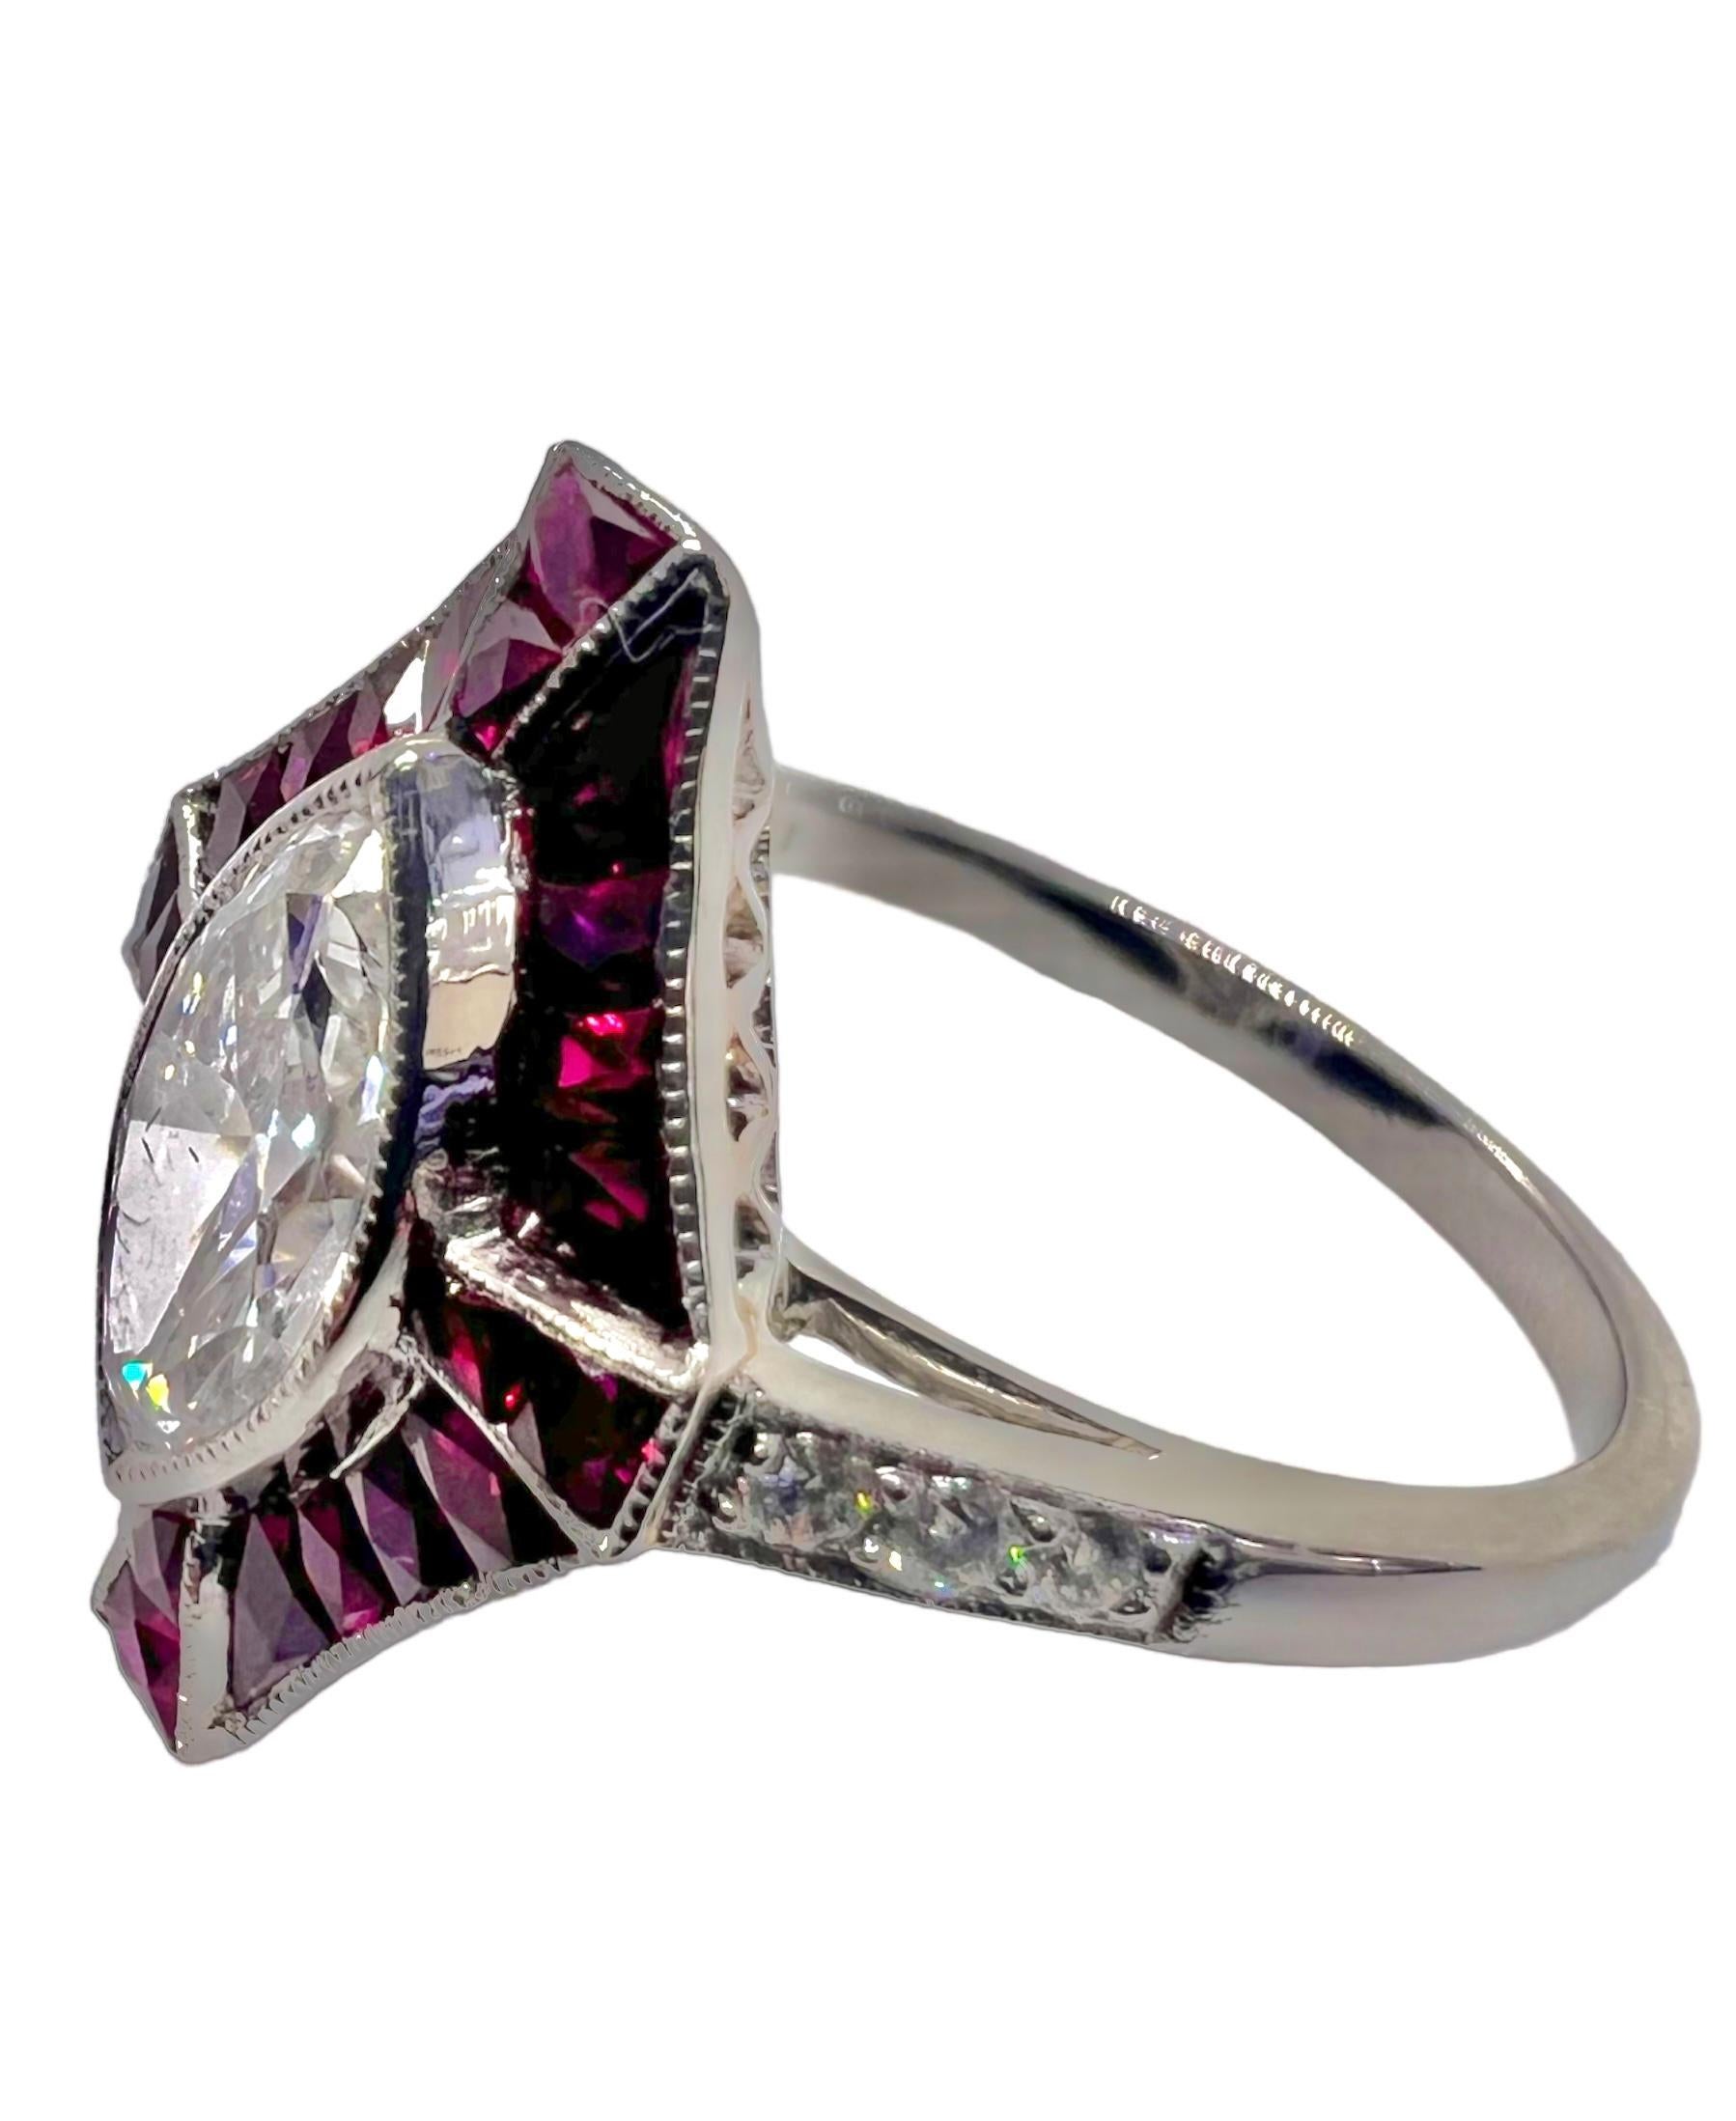 Sophia D. art deco style platinum ring with  marquise cut diamond center, 0.08 carat of small round diamond and 2.70 carats of rubies.

Sophia D by Joseph Dardashti LTD has been known worldwide for 35 years and are inspired by classic Art Deco